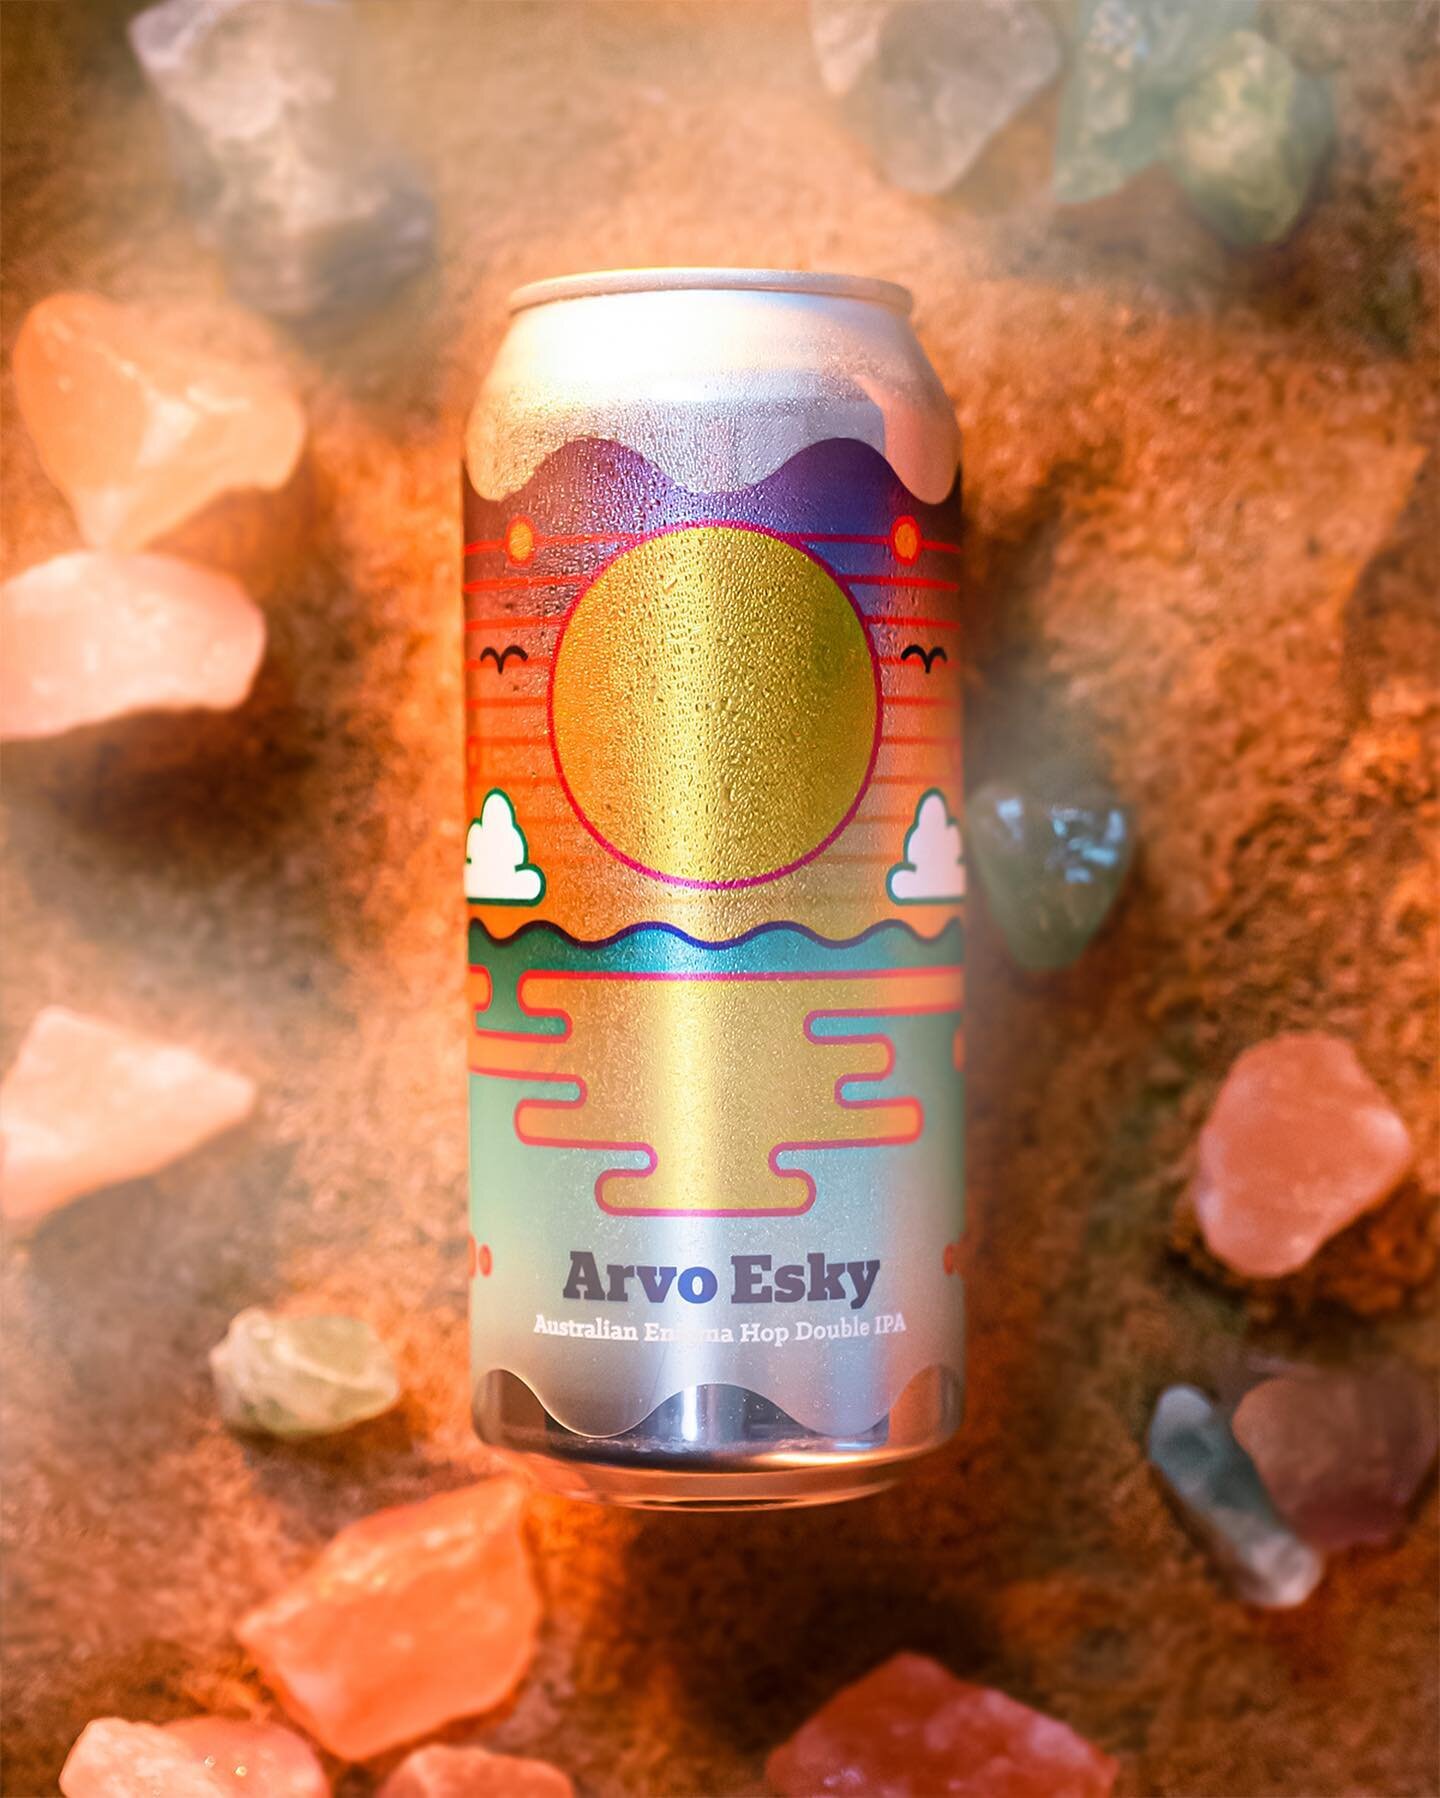 We're excited to bring back an old favorite, Arvo Esky! This tasty Double IPA is brewed with Australian Enigma hops and offers a punchy flavor. We pick up flavors and aromas of Pineapple, Melon, and peach. Followed by red fruit flavors of Raspberry a